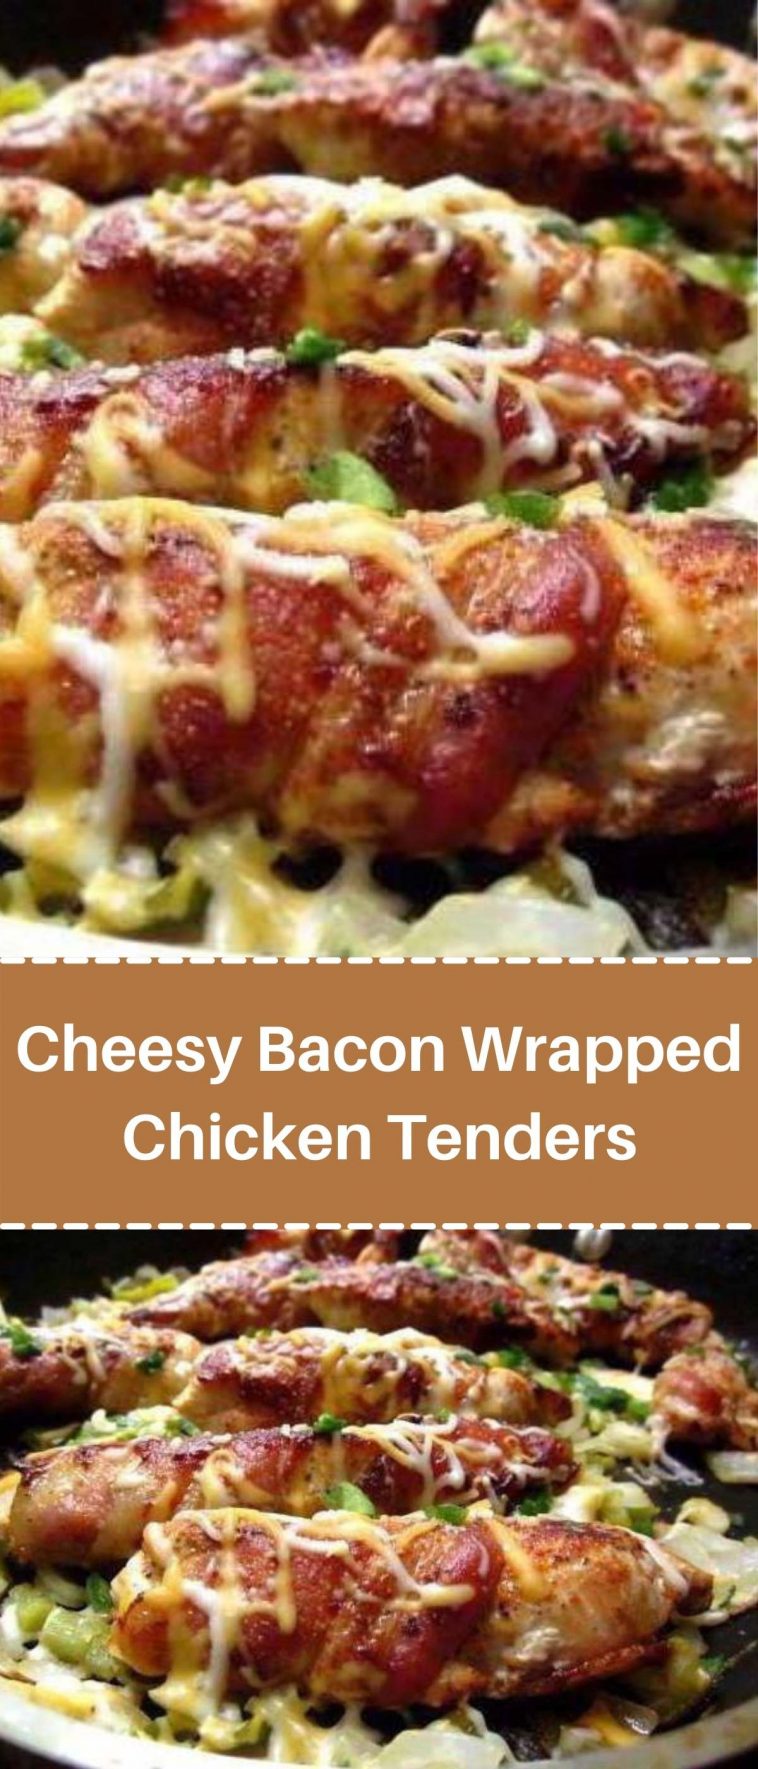 Cheesy Bacon Wrapped Chicken Tenders